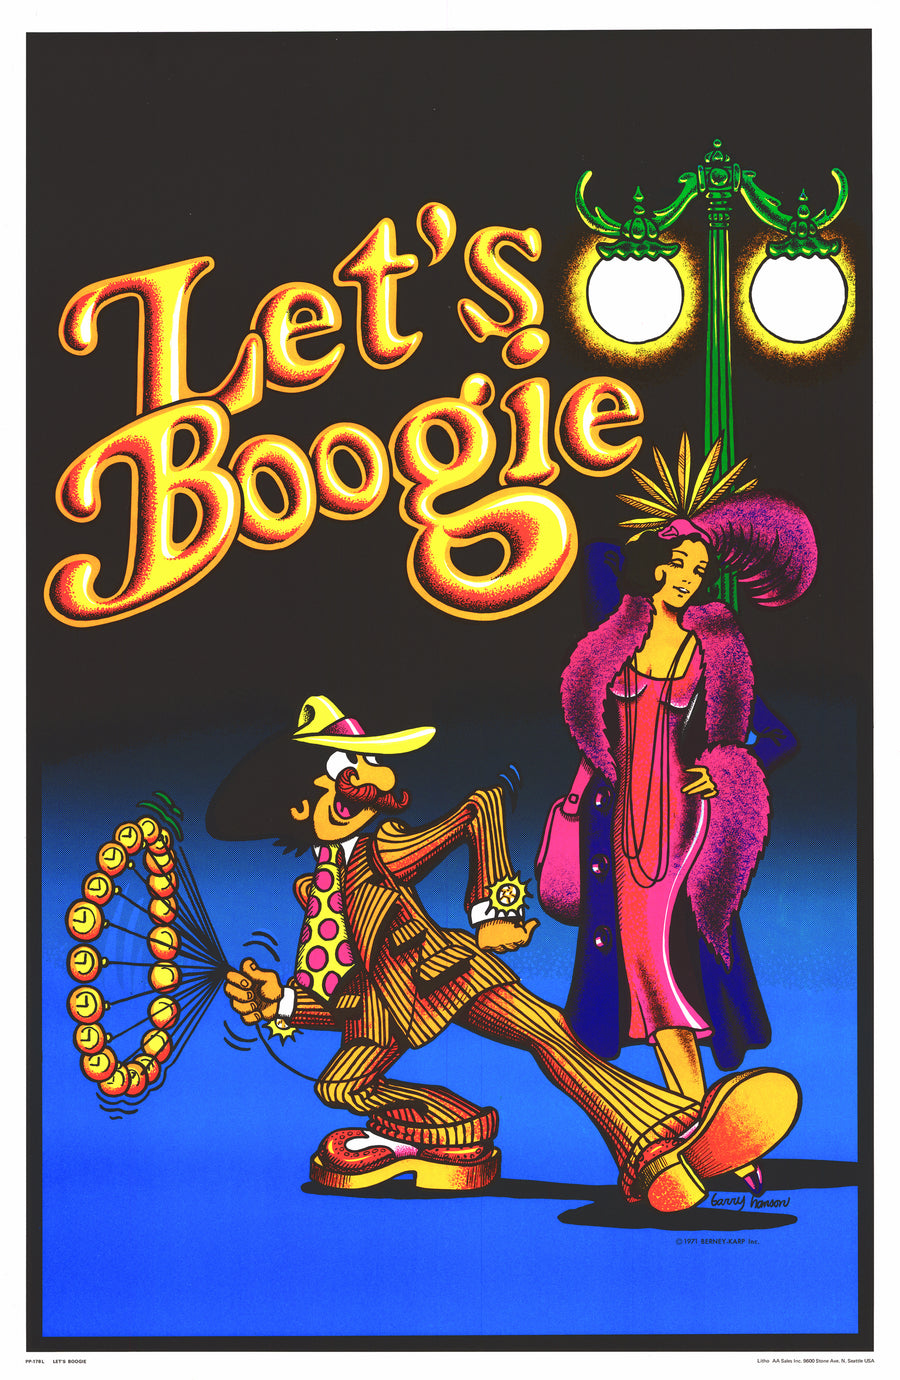 Vintage Psychedelic Poster: Let's Boogie Screen Print Poster by Garry Henderson 1971